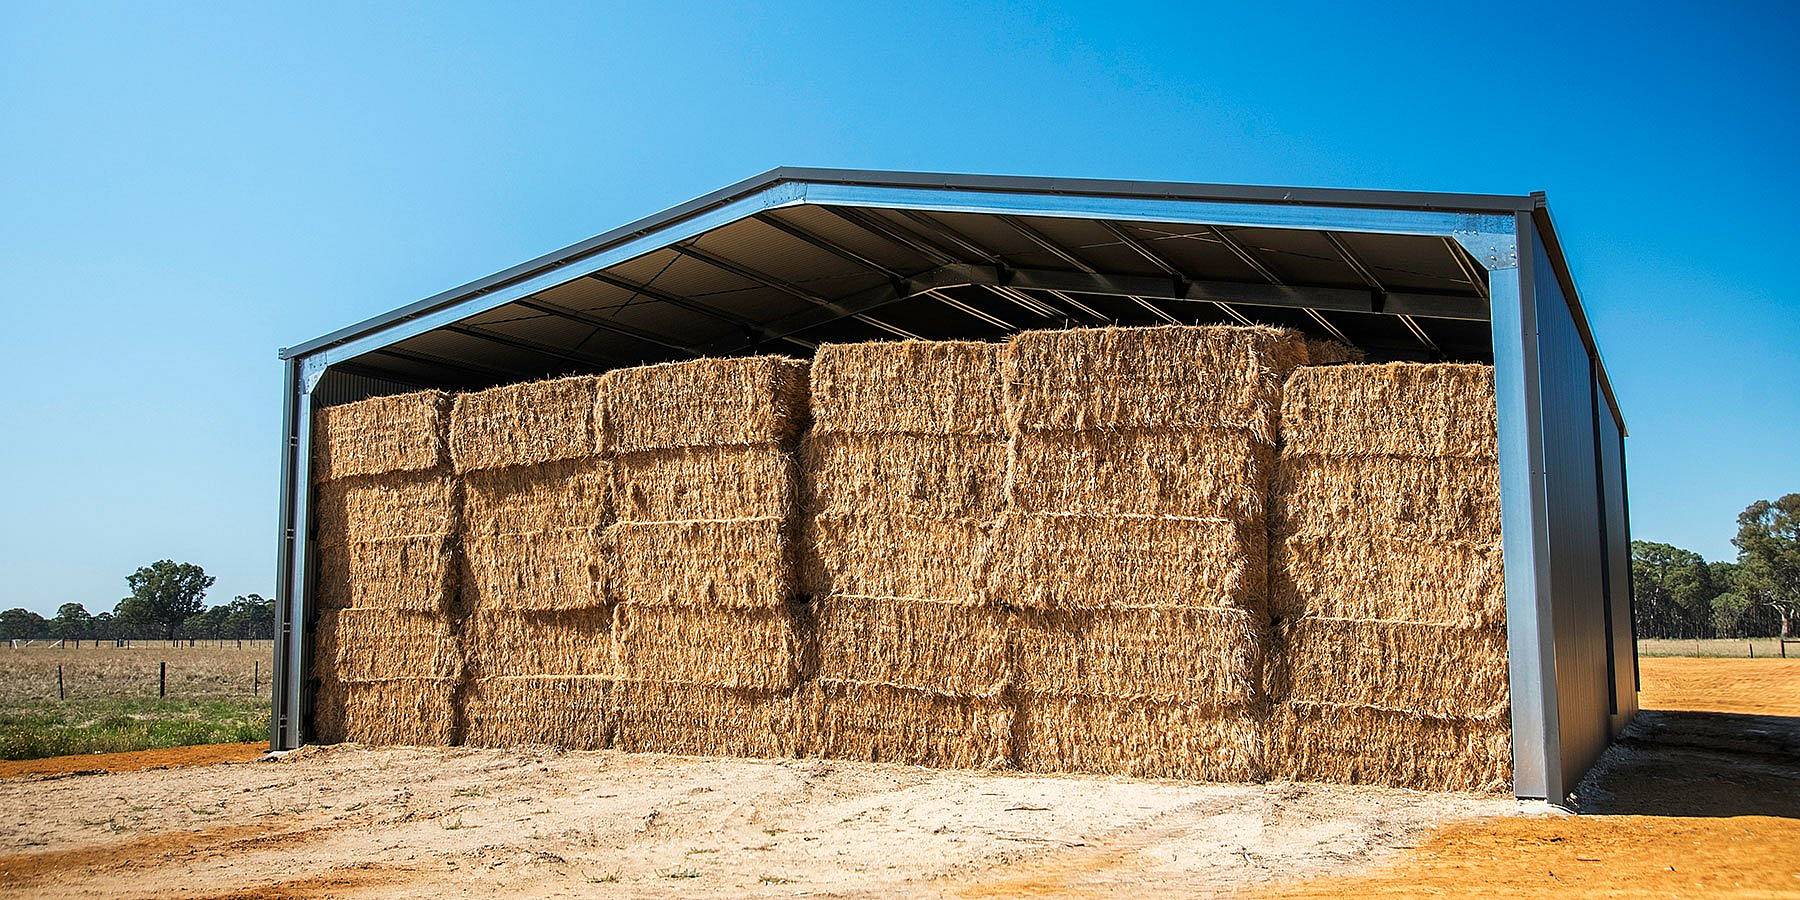 Ranchers and farmers use sheds to store hay and grain.